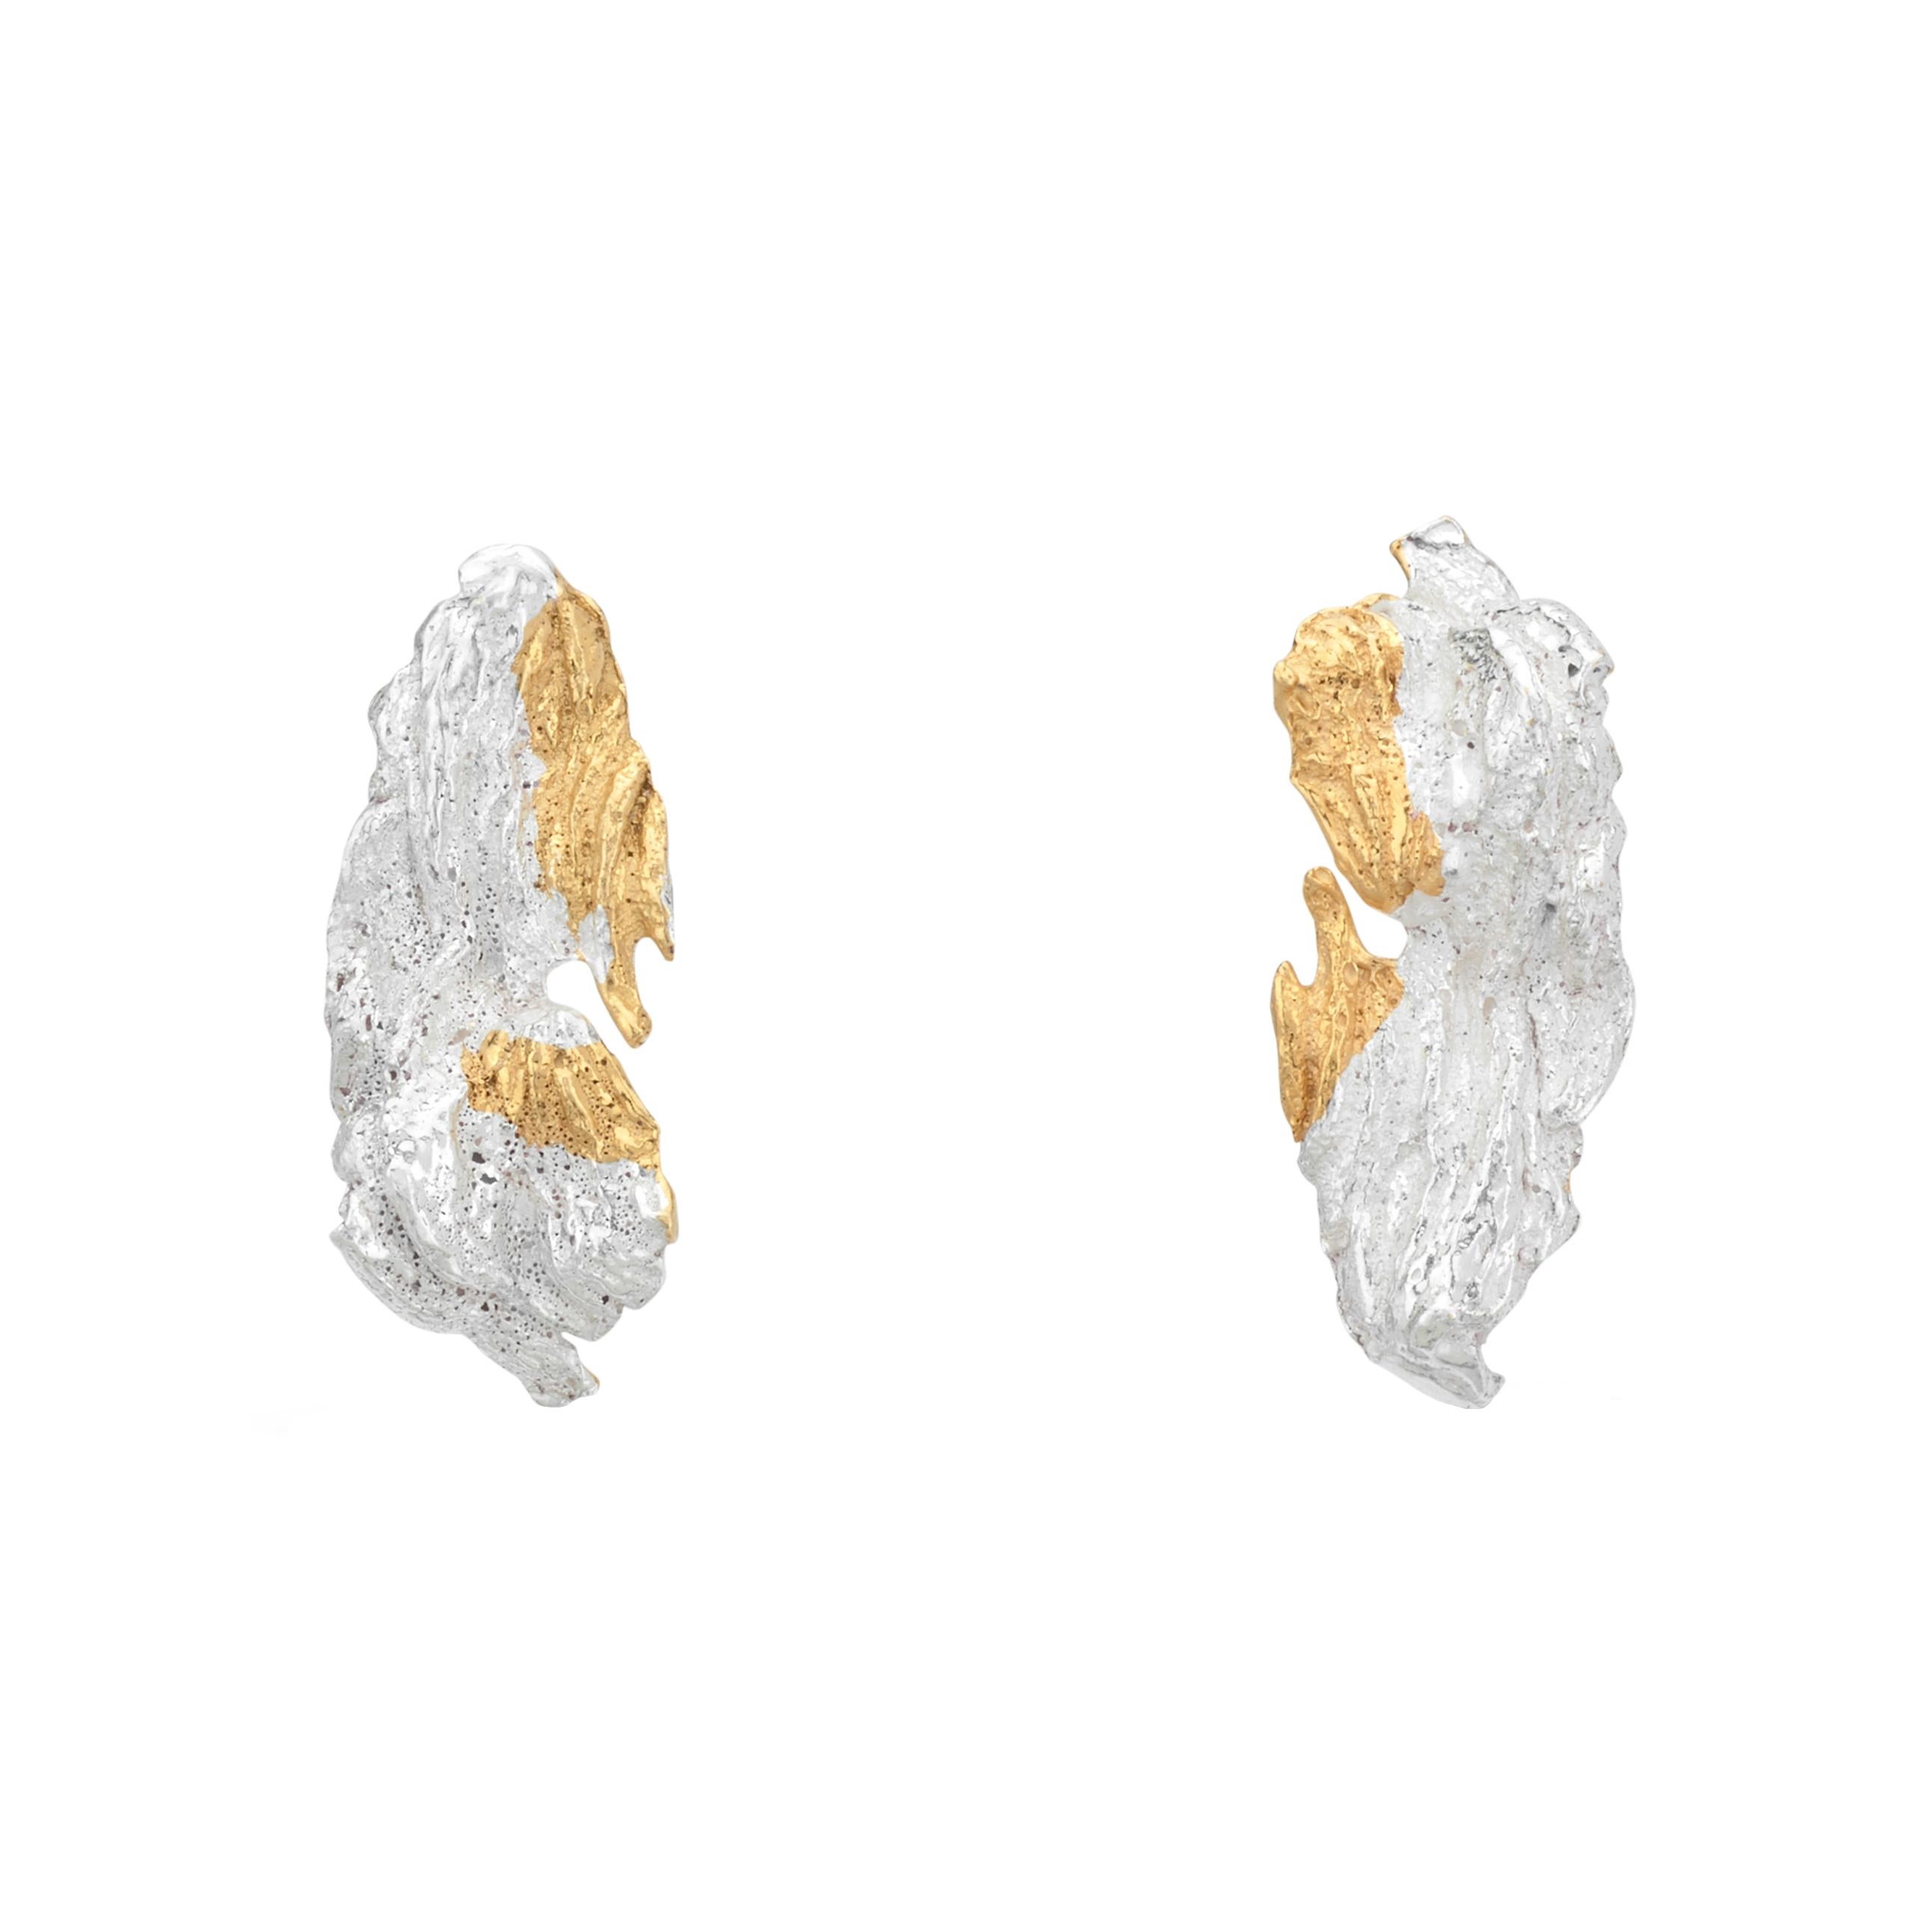 Loveness Lee - Anani - Small Gold and Silver Dangle Drop Textured Earrings For Sale